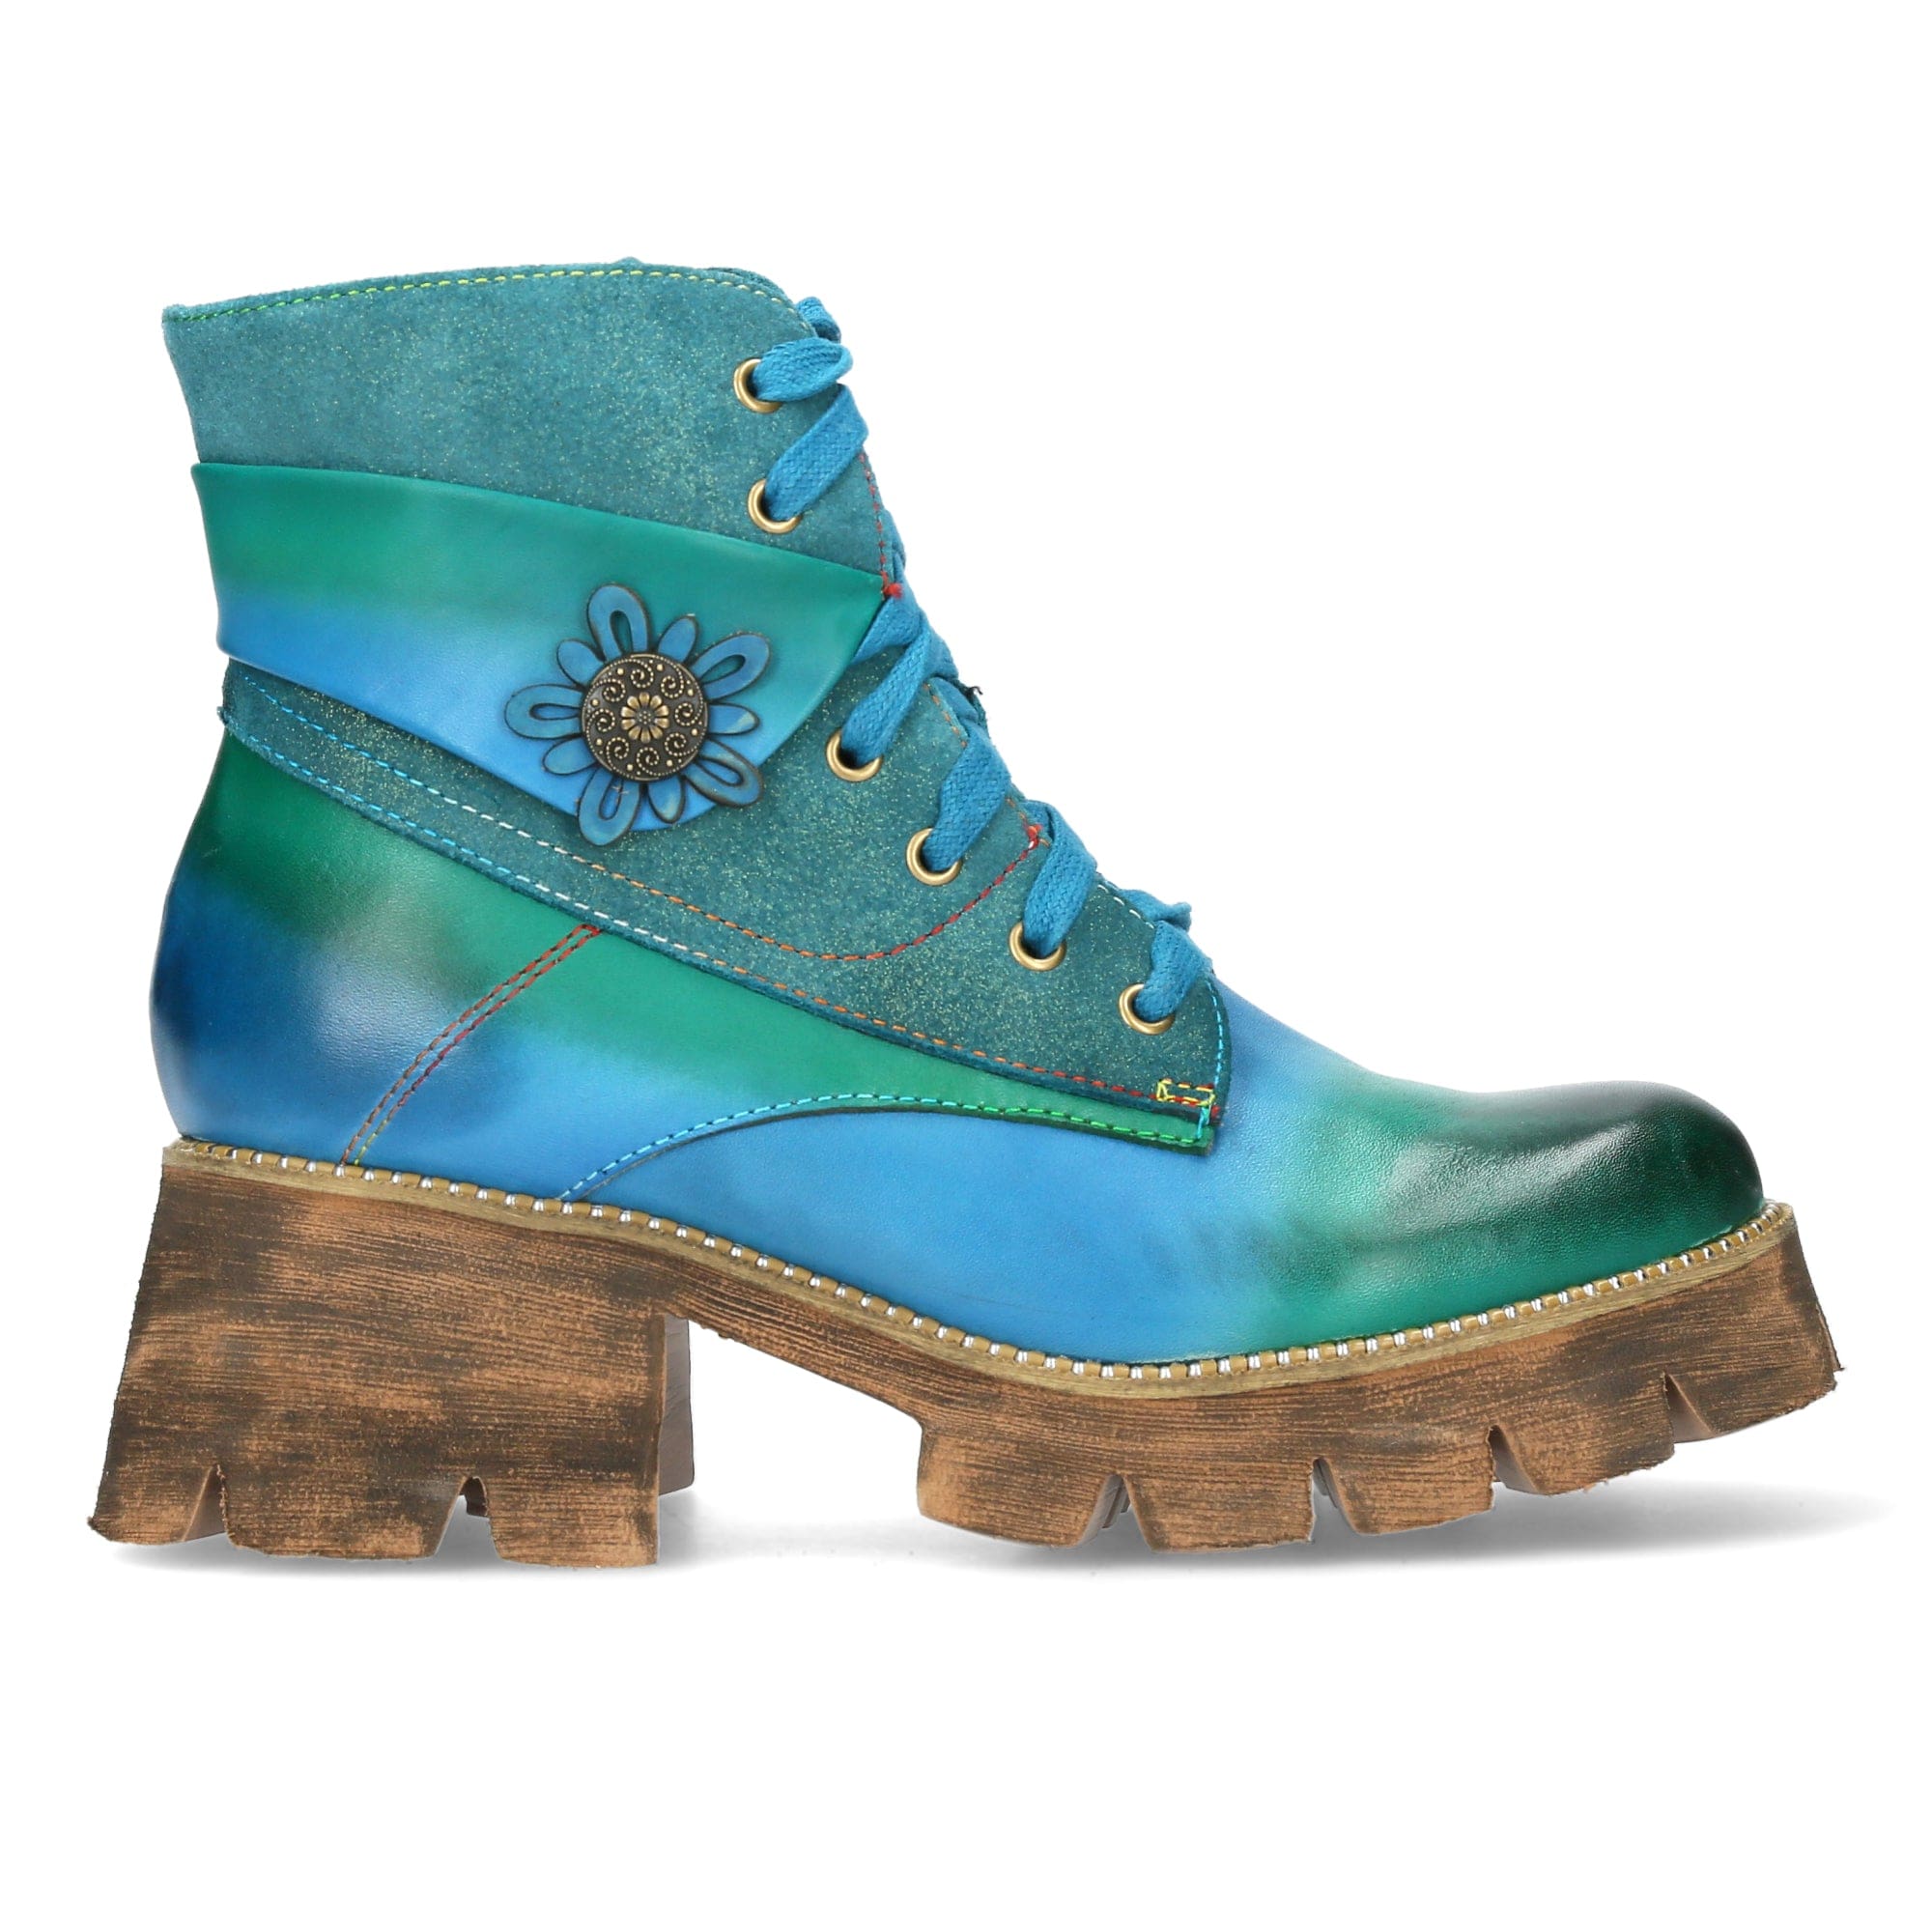 Chaussure OMIO 01 - 35 / Turquoise - Boots